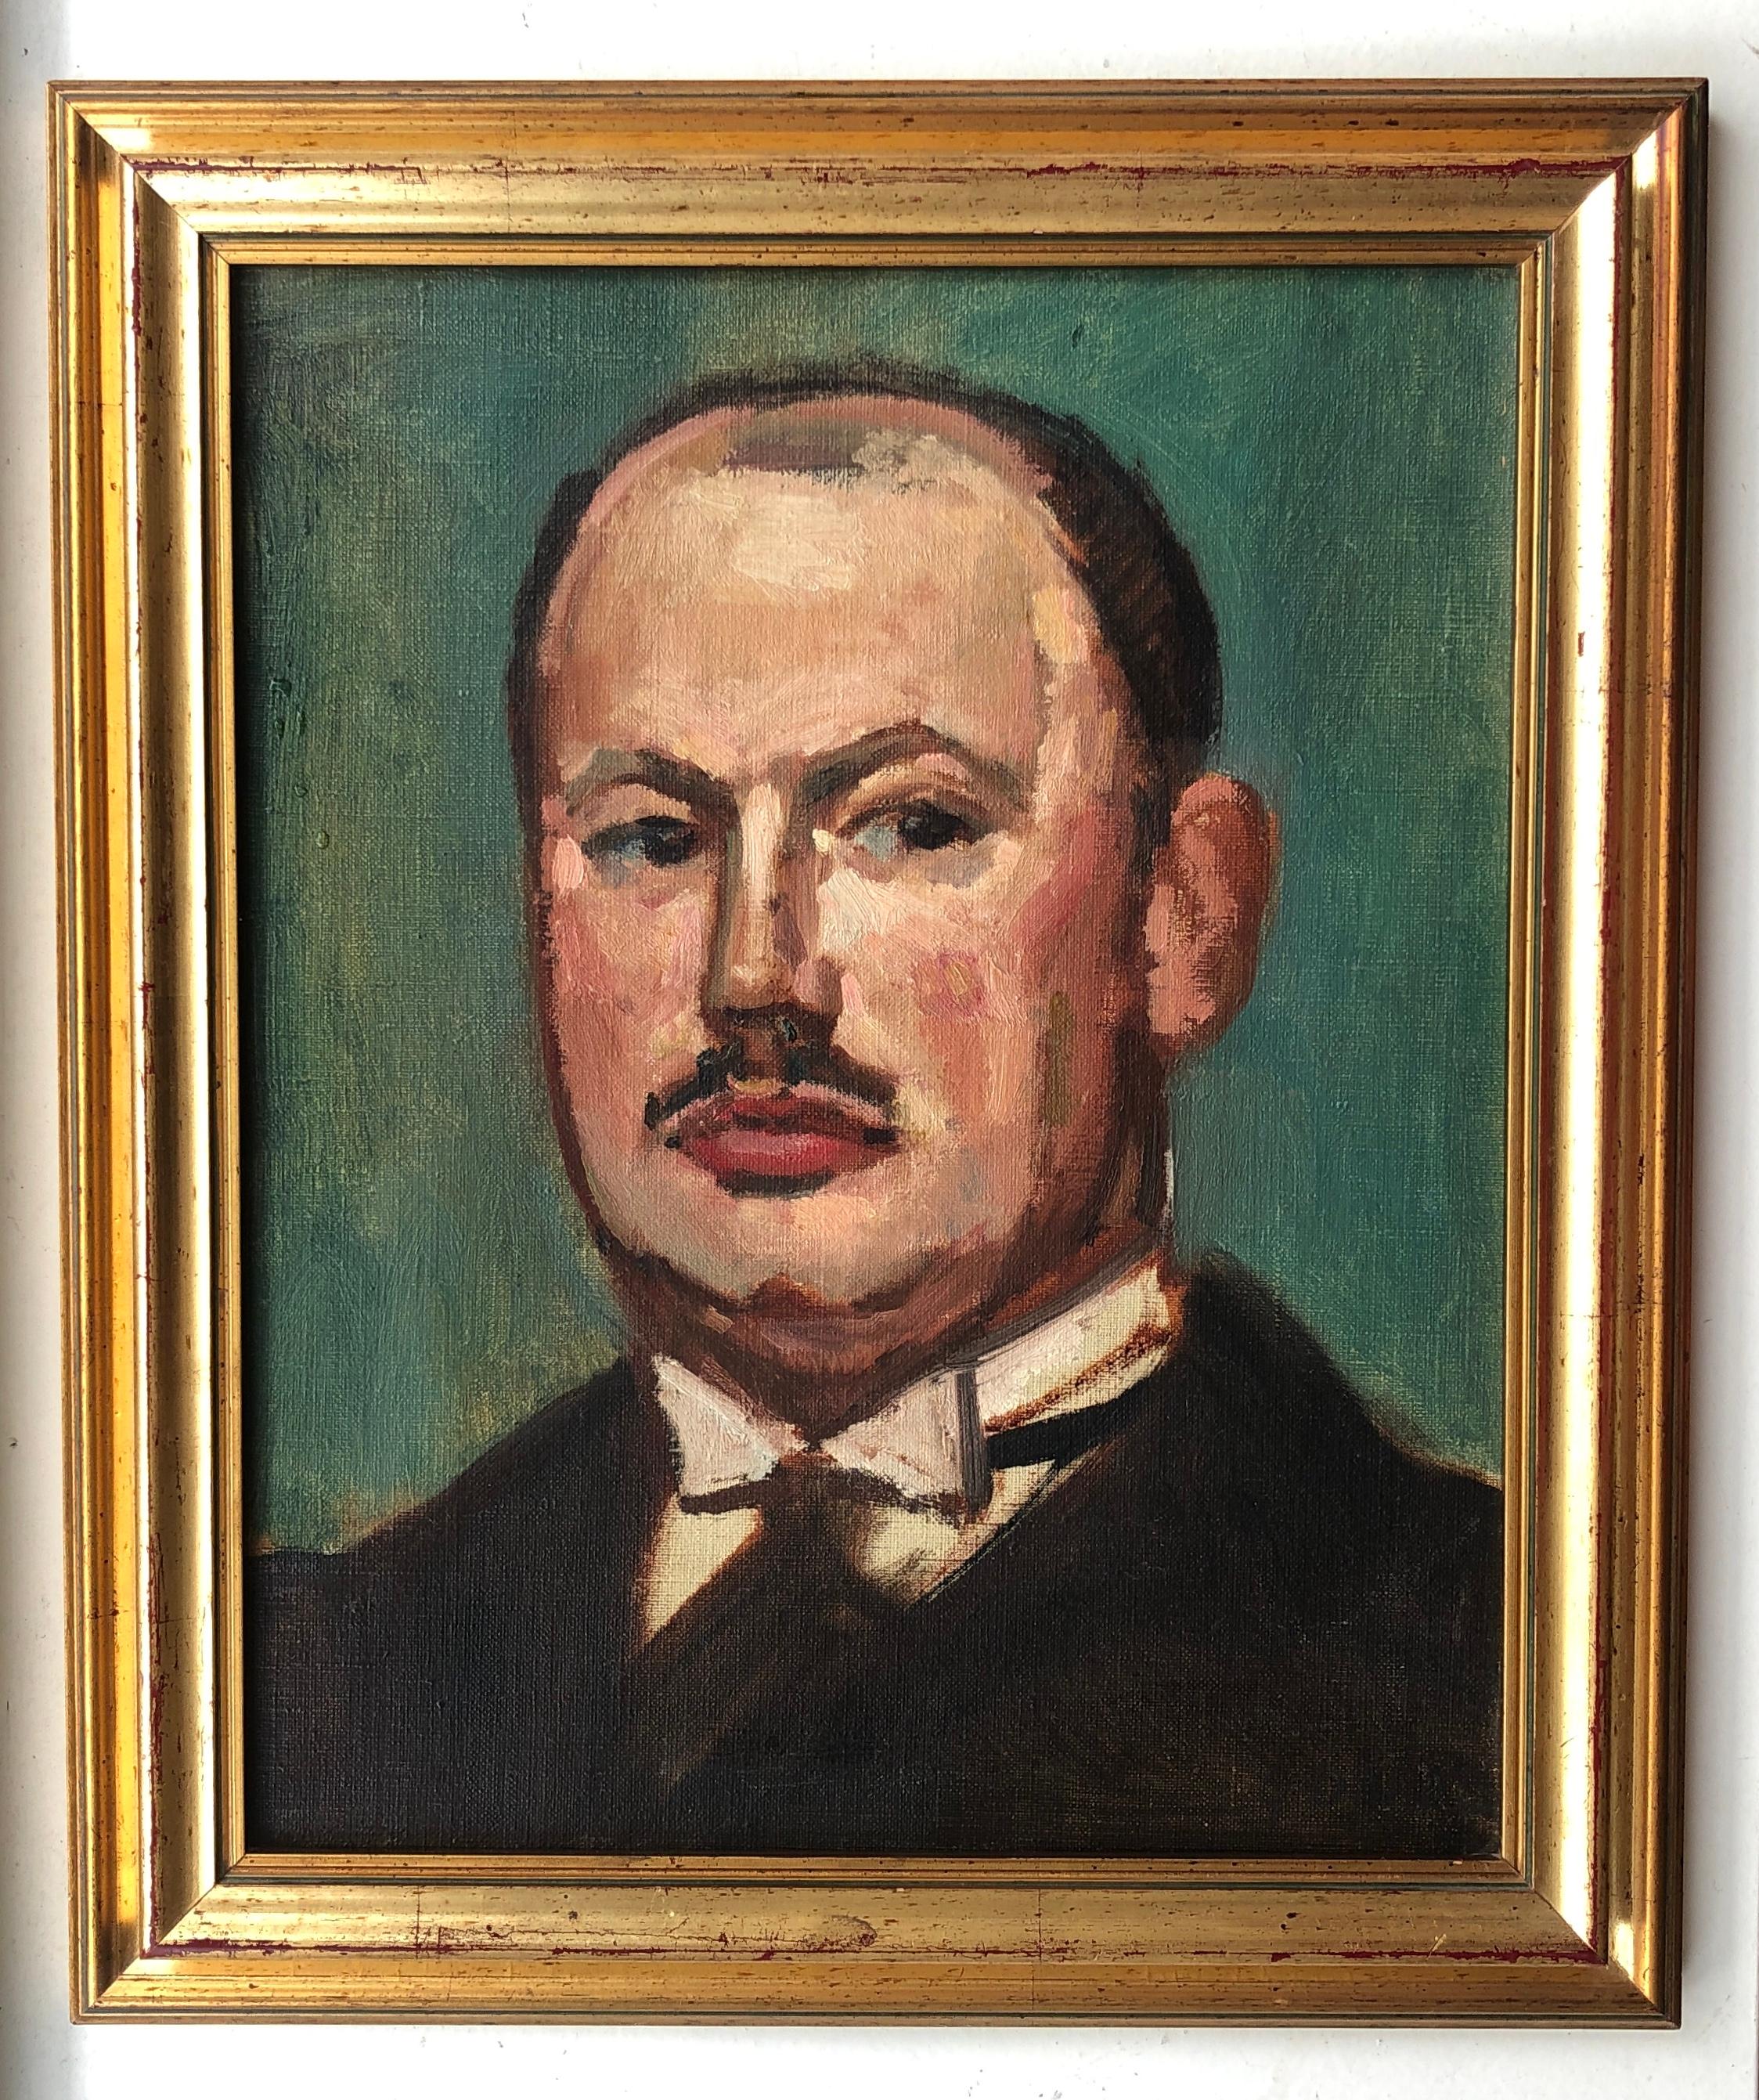 Man with mustache - Painting by Georges Darel